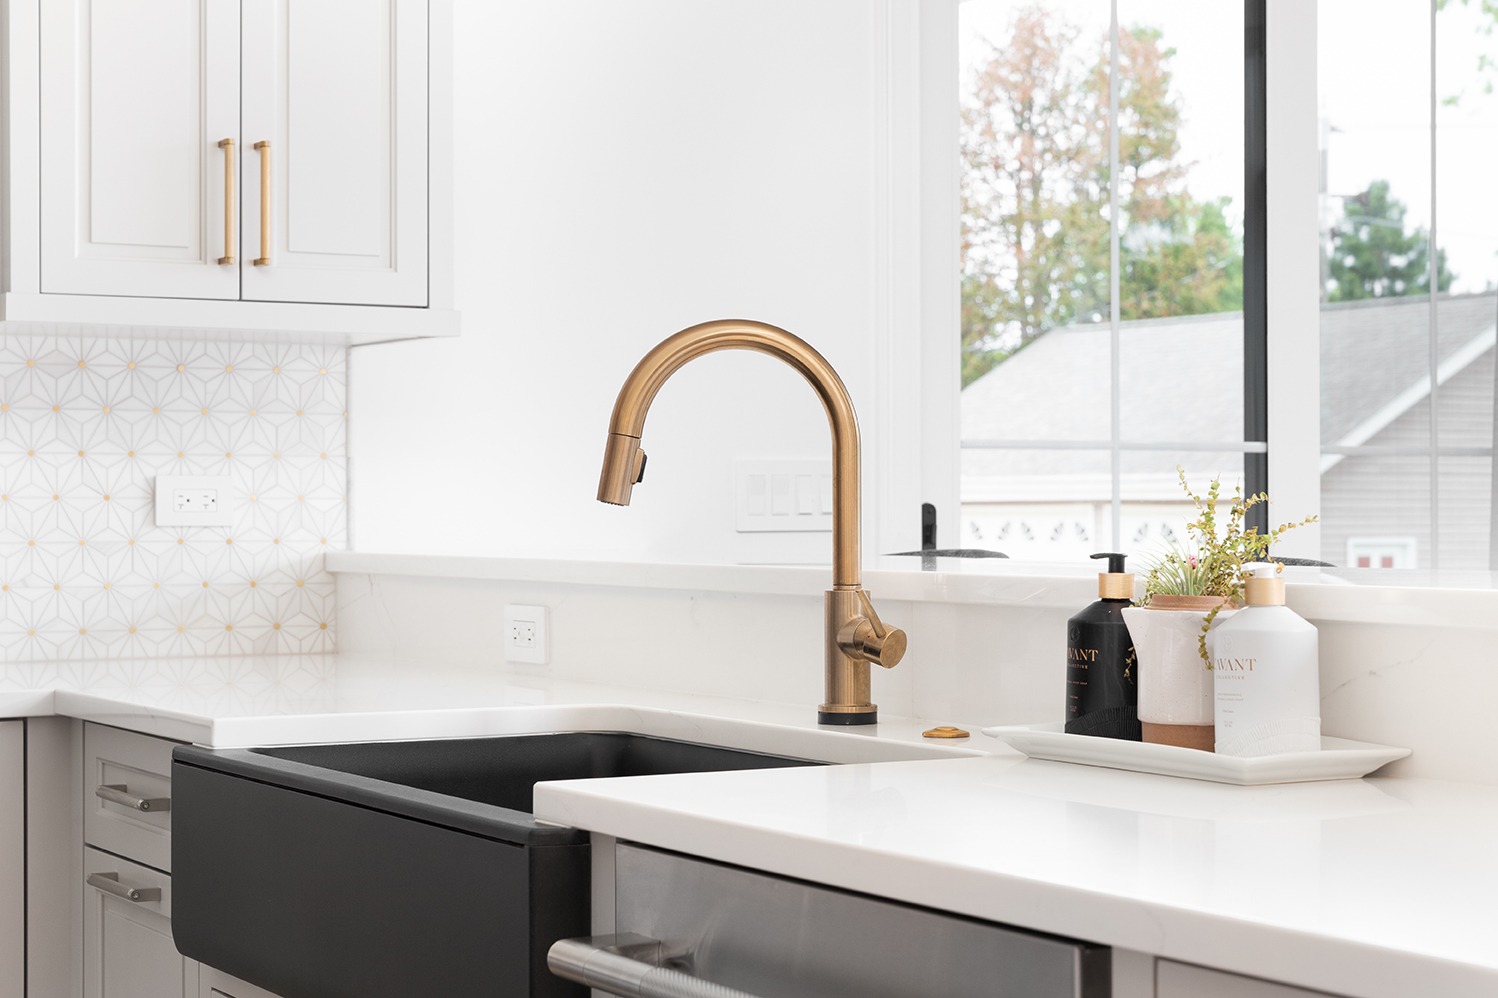 A beautiful sink in a remodeled modern farmhouse kitchen with a gold faucet, black apron or farmhouse sink, white granite, and a tiled backsplash.